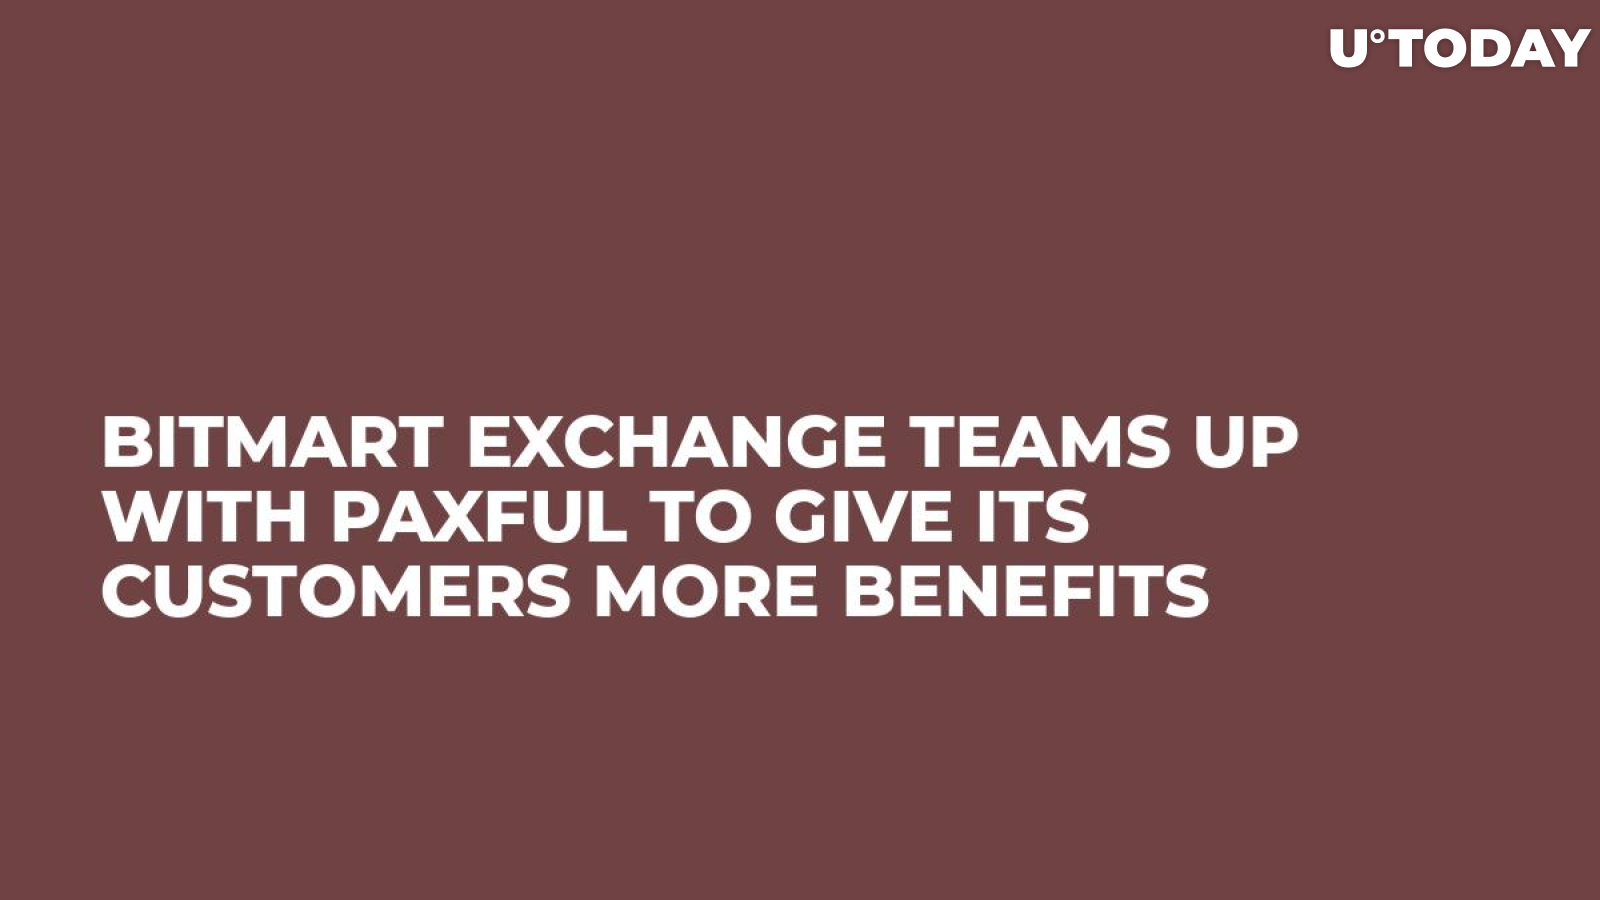 BitMart Exchange Teams Up with Paxful to Give Its Customers More Benefits